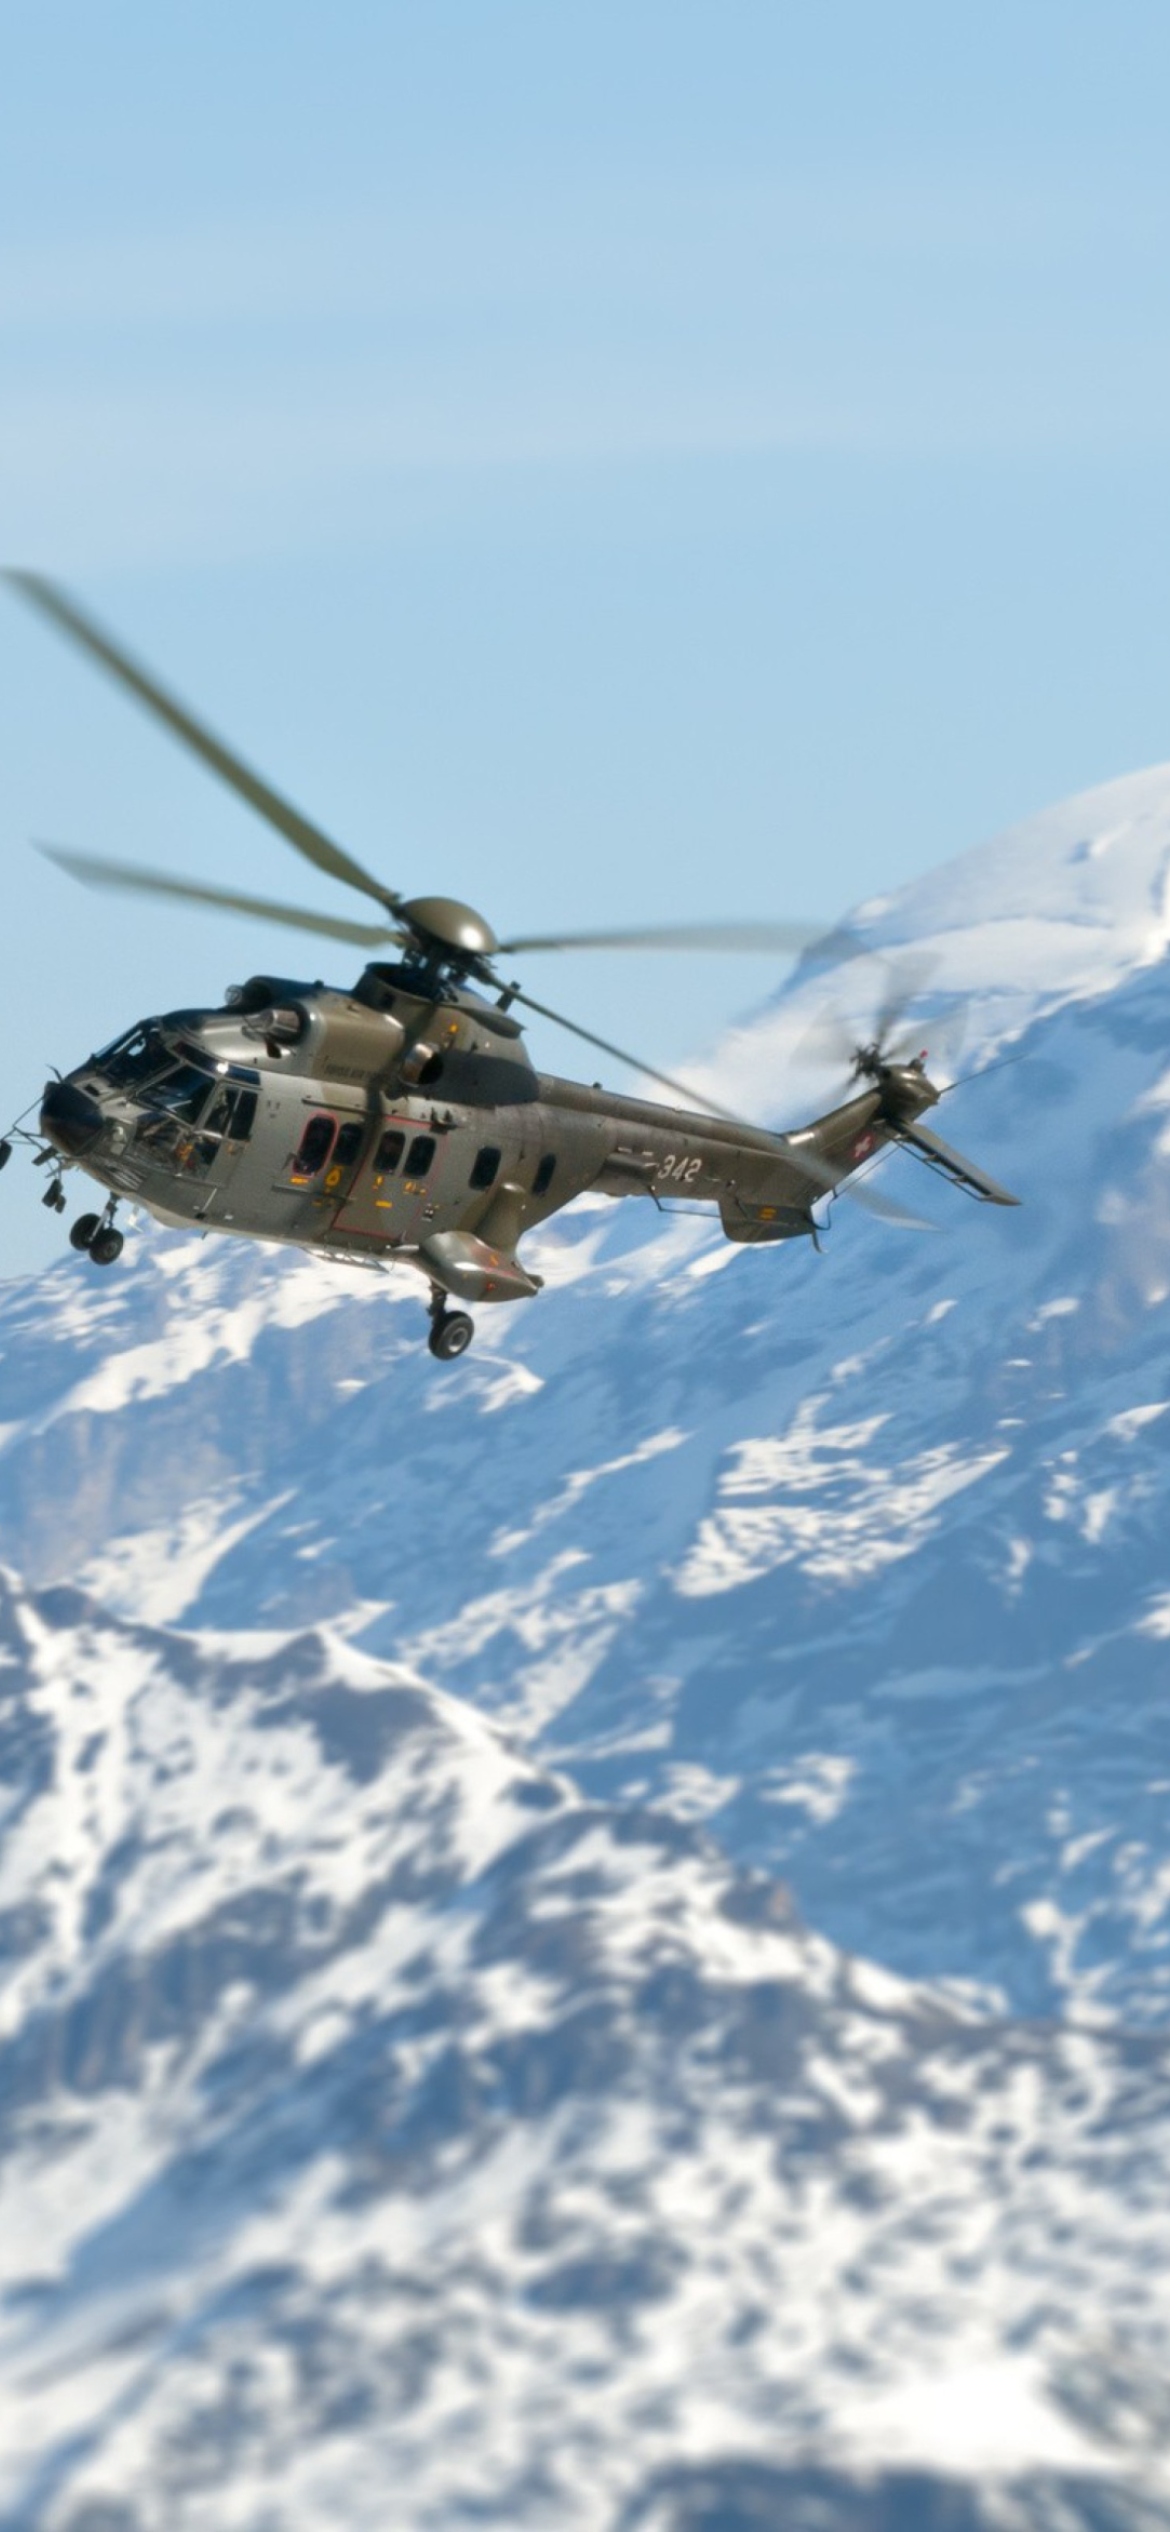 Sfondi Helicopter Over Snowy Mountains 1170x2532